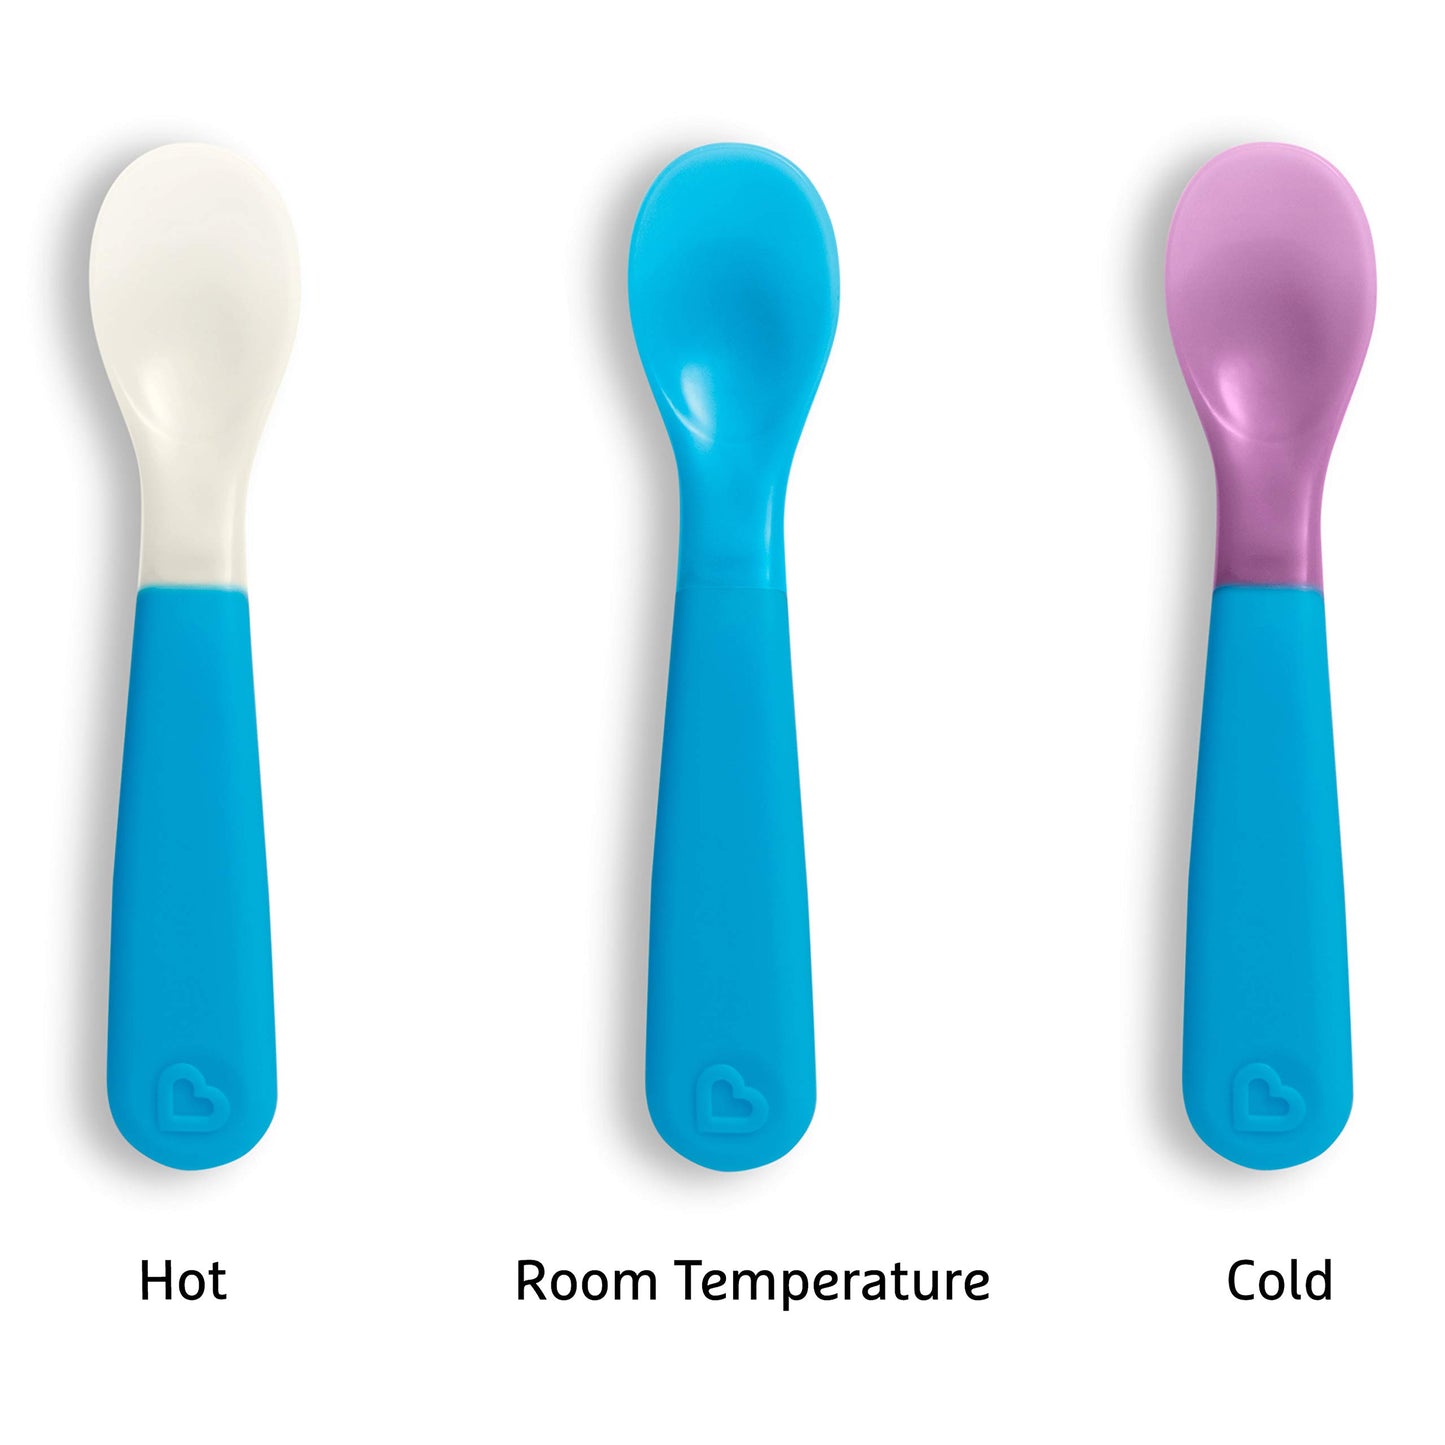 Munchkin Colorreveal Color Changing Toddler Forks & Spoons, 6 Pack